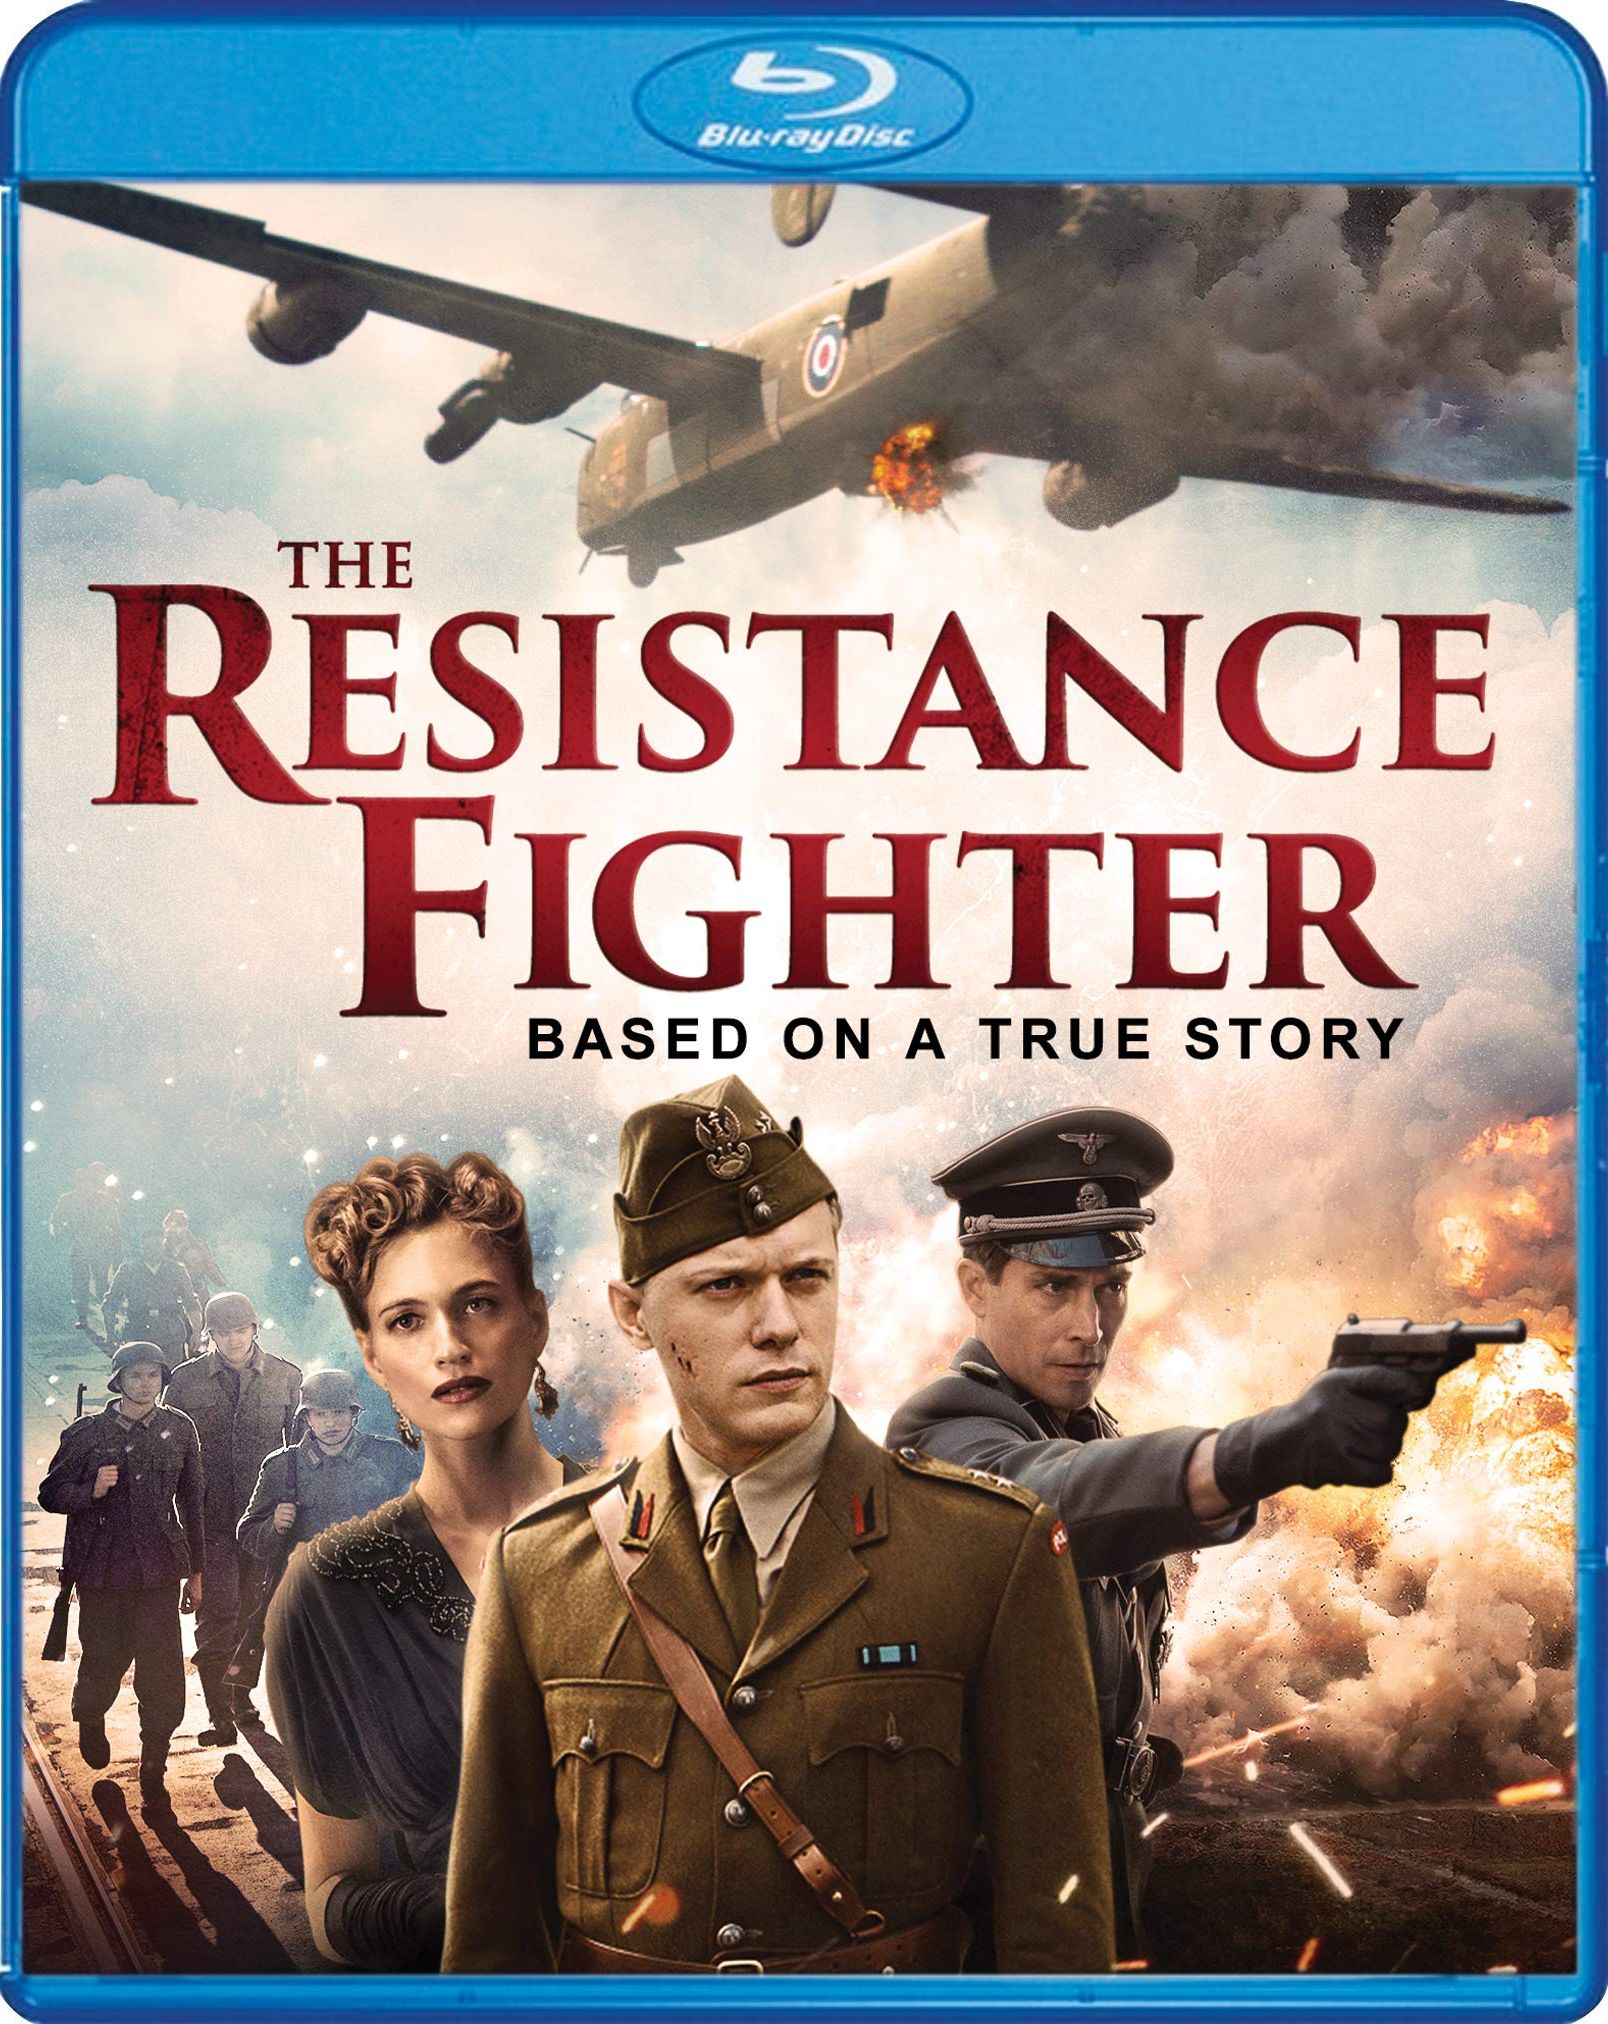 The Resistance Fighter DVD Release Date August 4, 2020